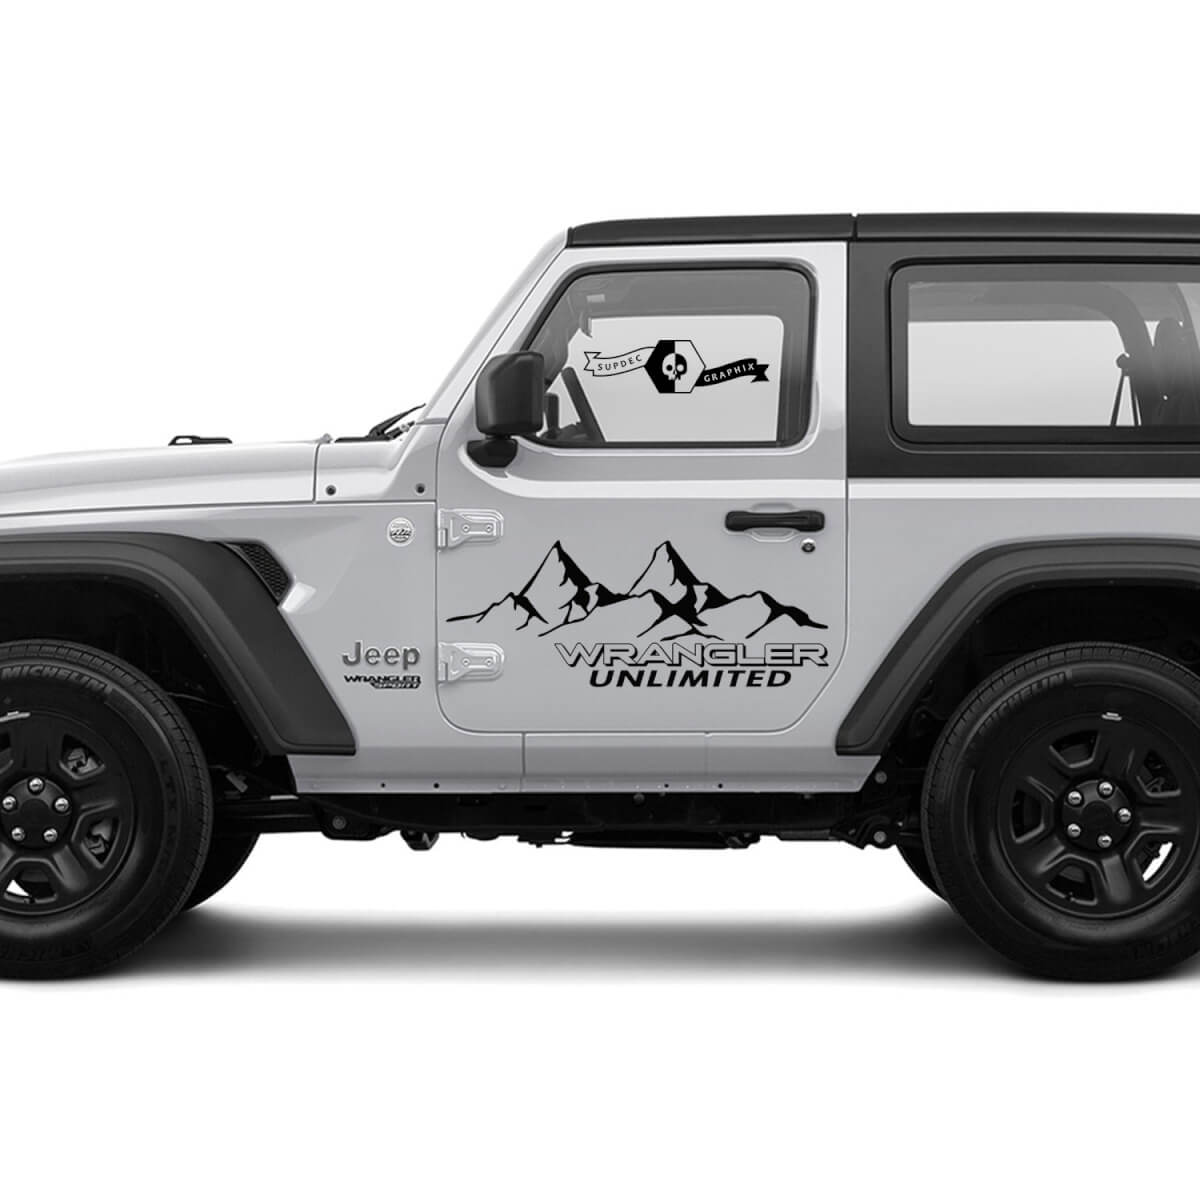 2 New JEEP Wrangler Unlimited Door Decal Sticker 4x4 off-raod Mountains  side Graphics Decal Sticker